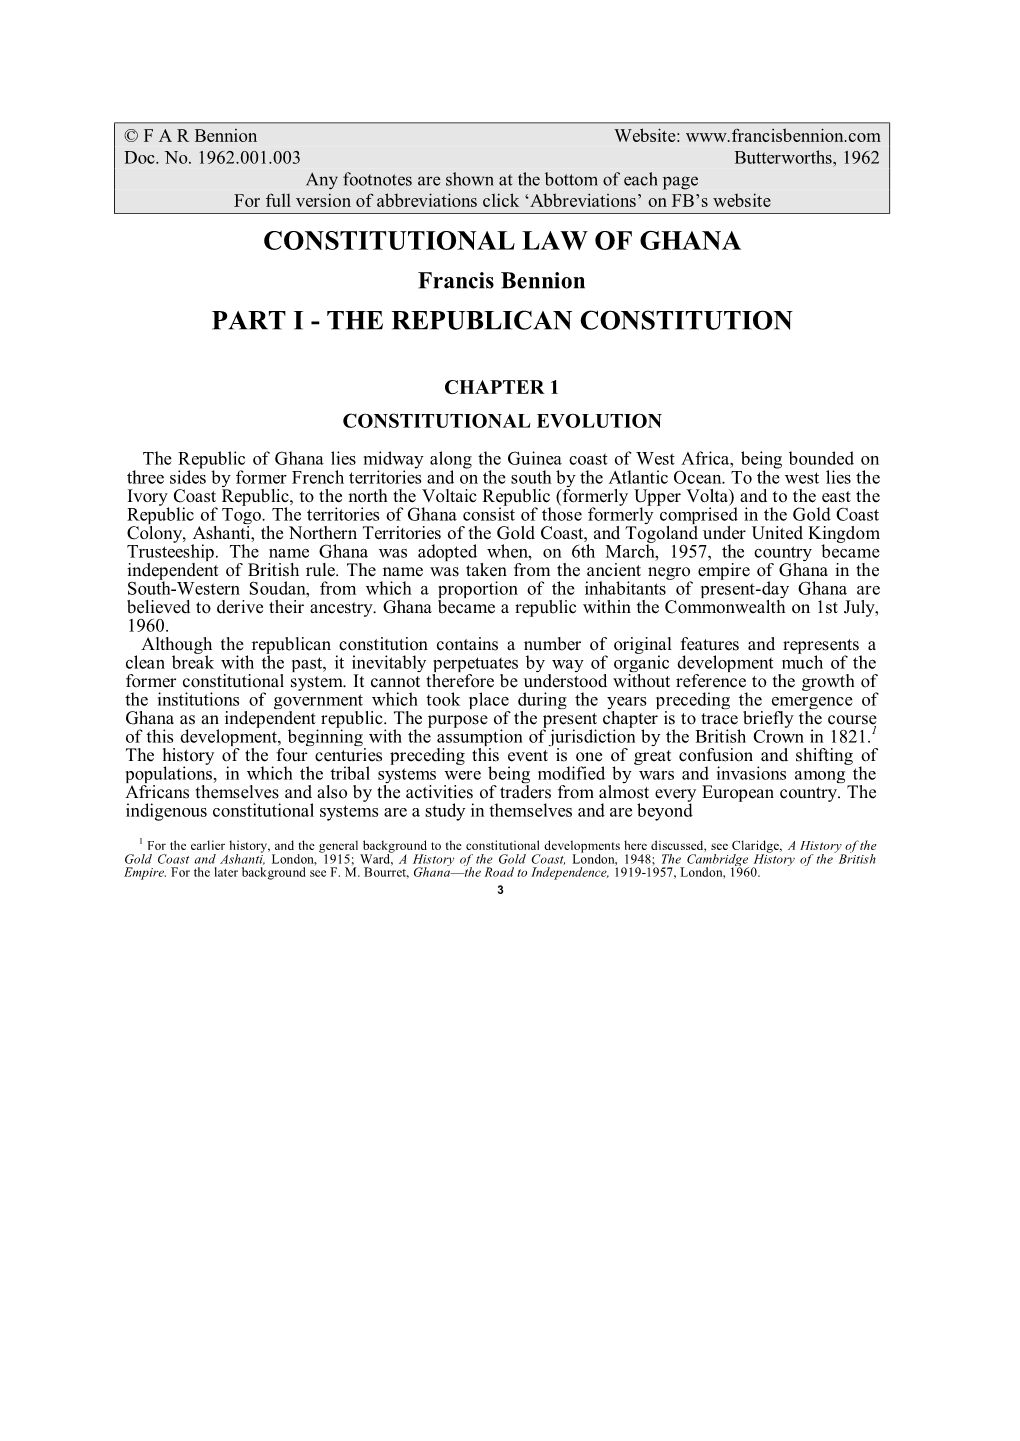 Constitutional Law of Ghana Part I